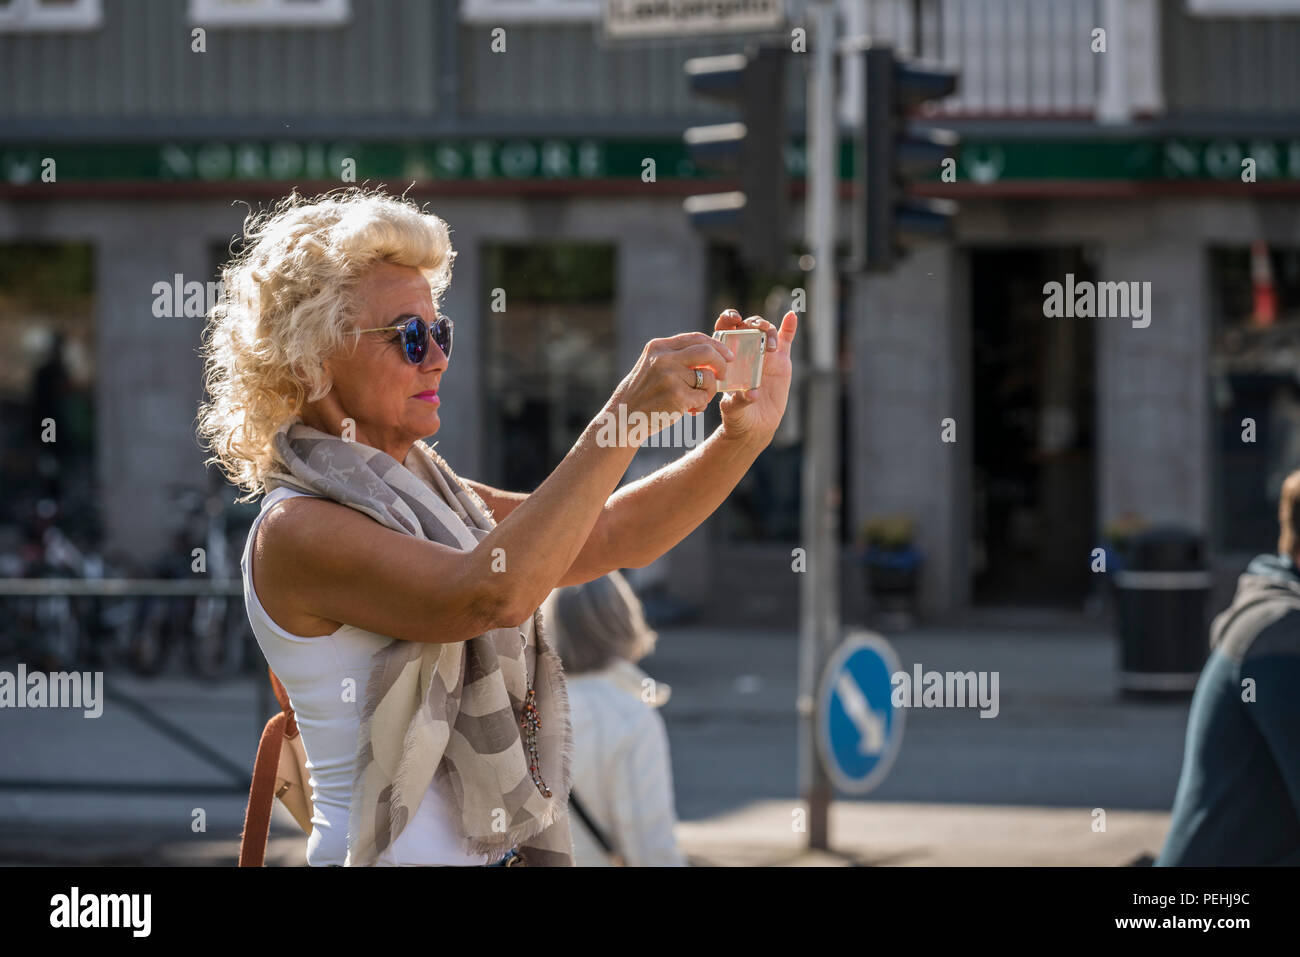 Woman taking a picture with a smart phone, Reykjavik, Iceland Stock Photo